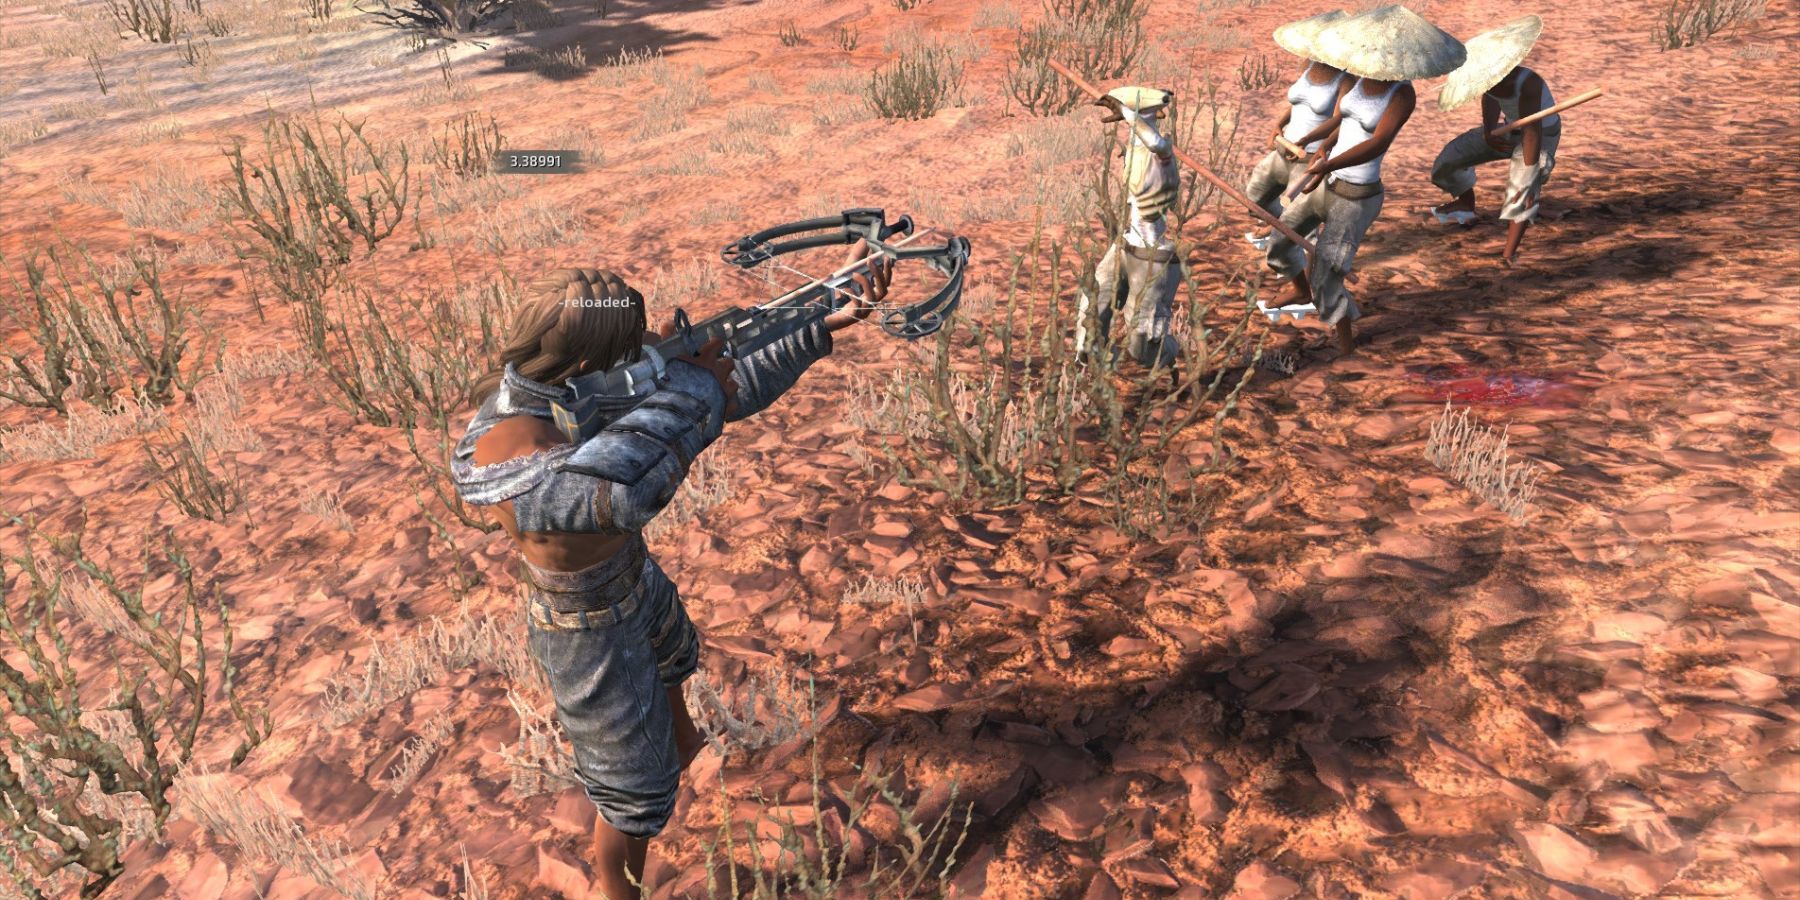 Kenshi player shooting a crossbow